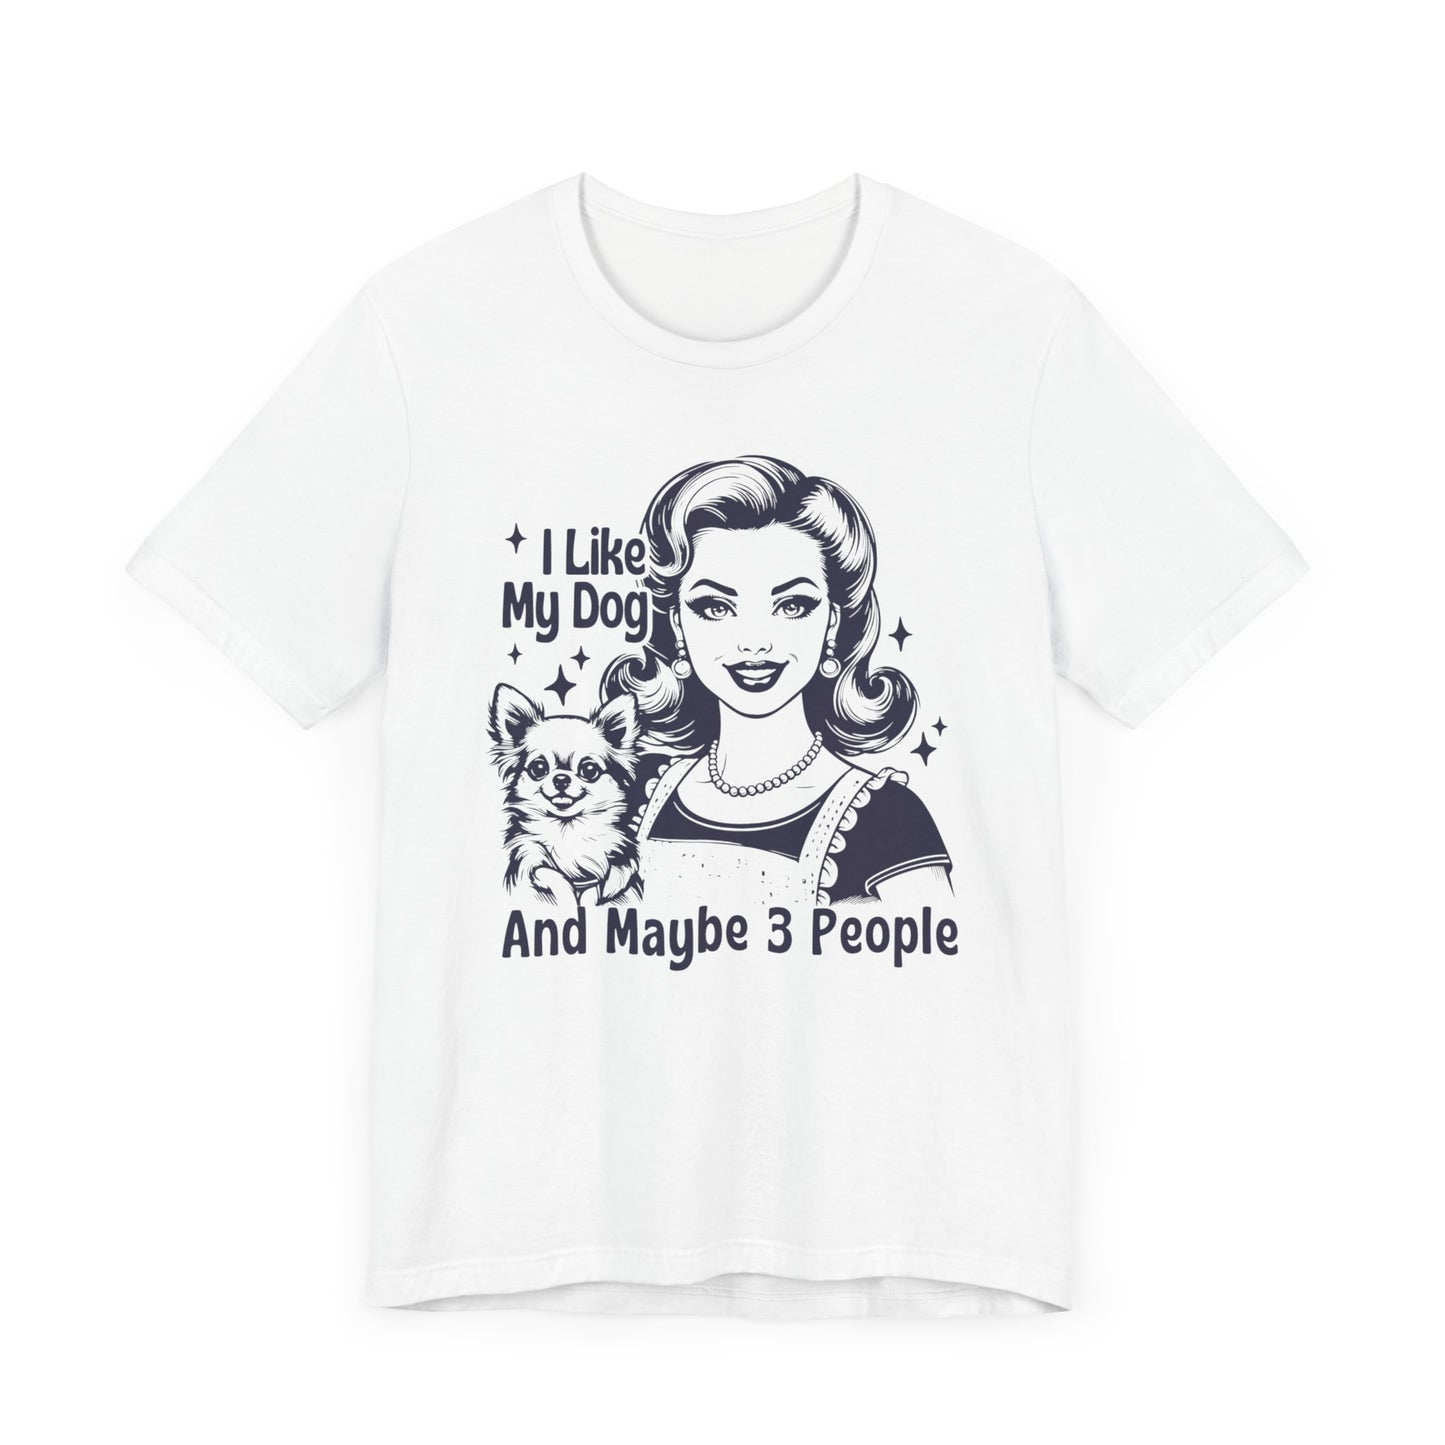 I Like My Dog And Maybe 3 People - T-Shirt